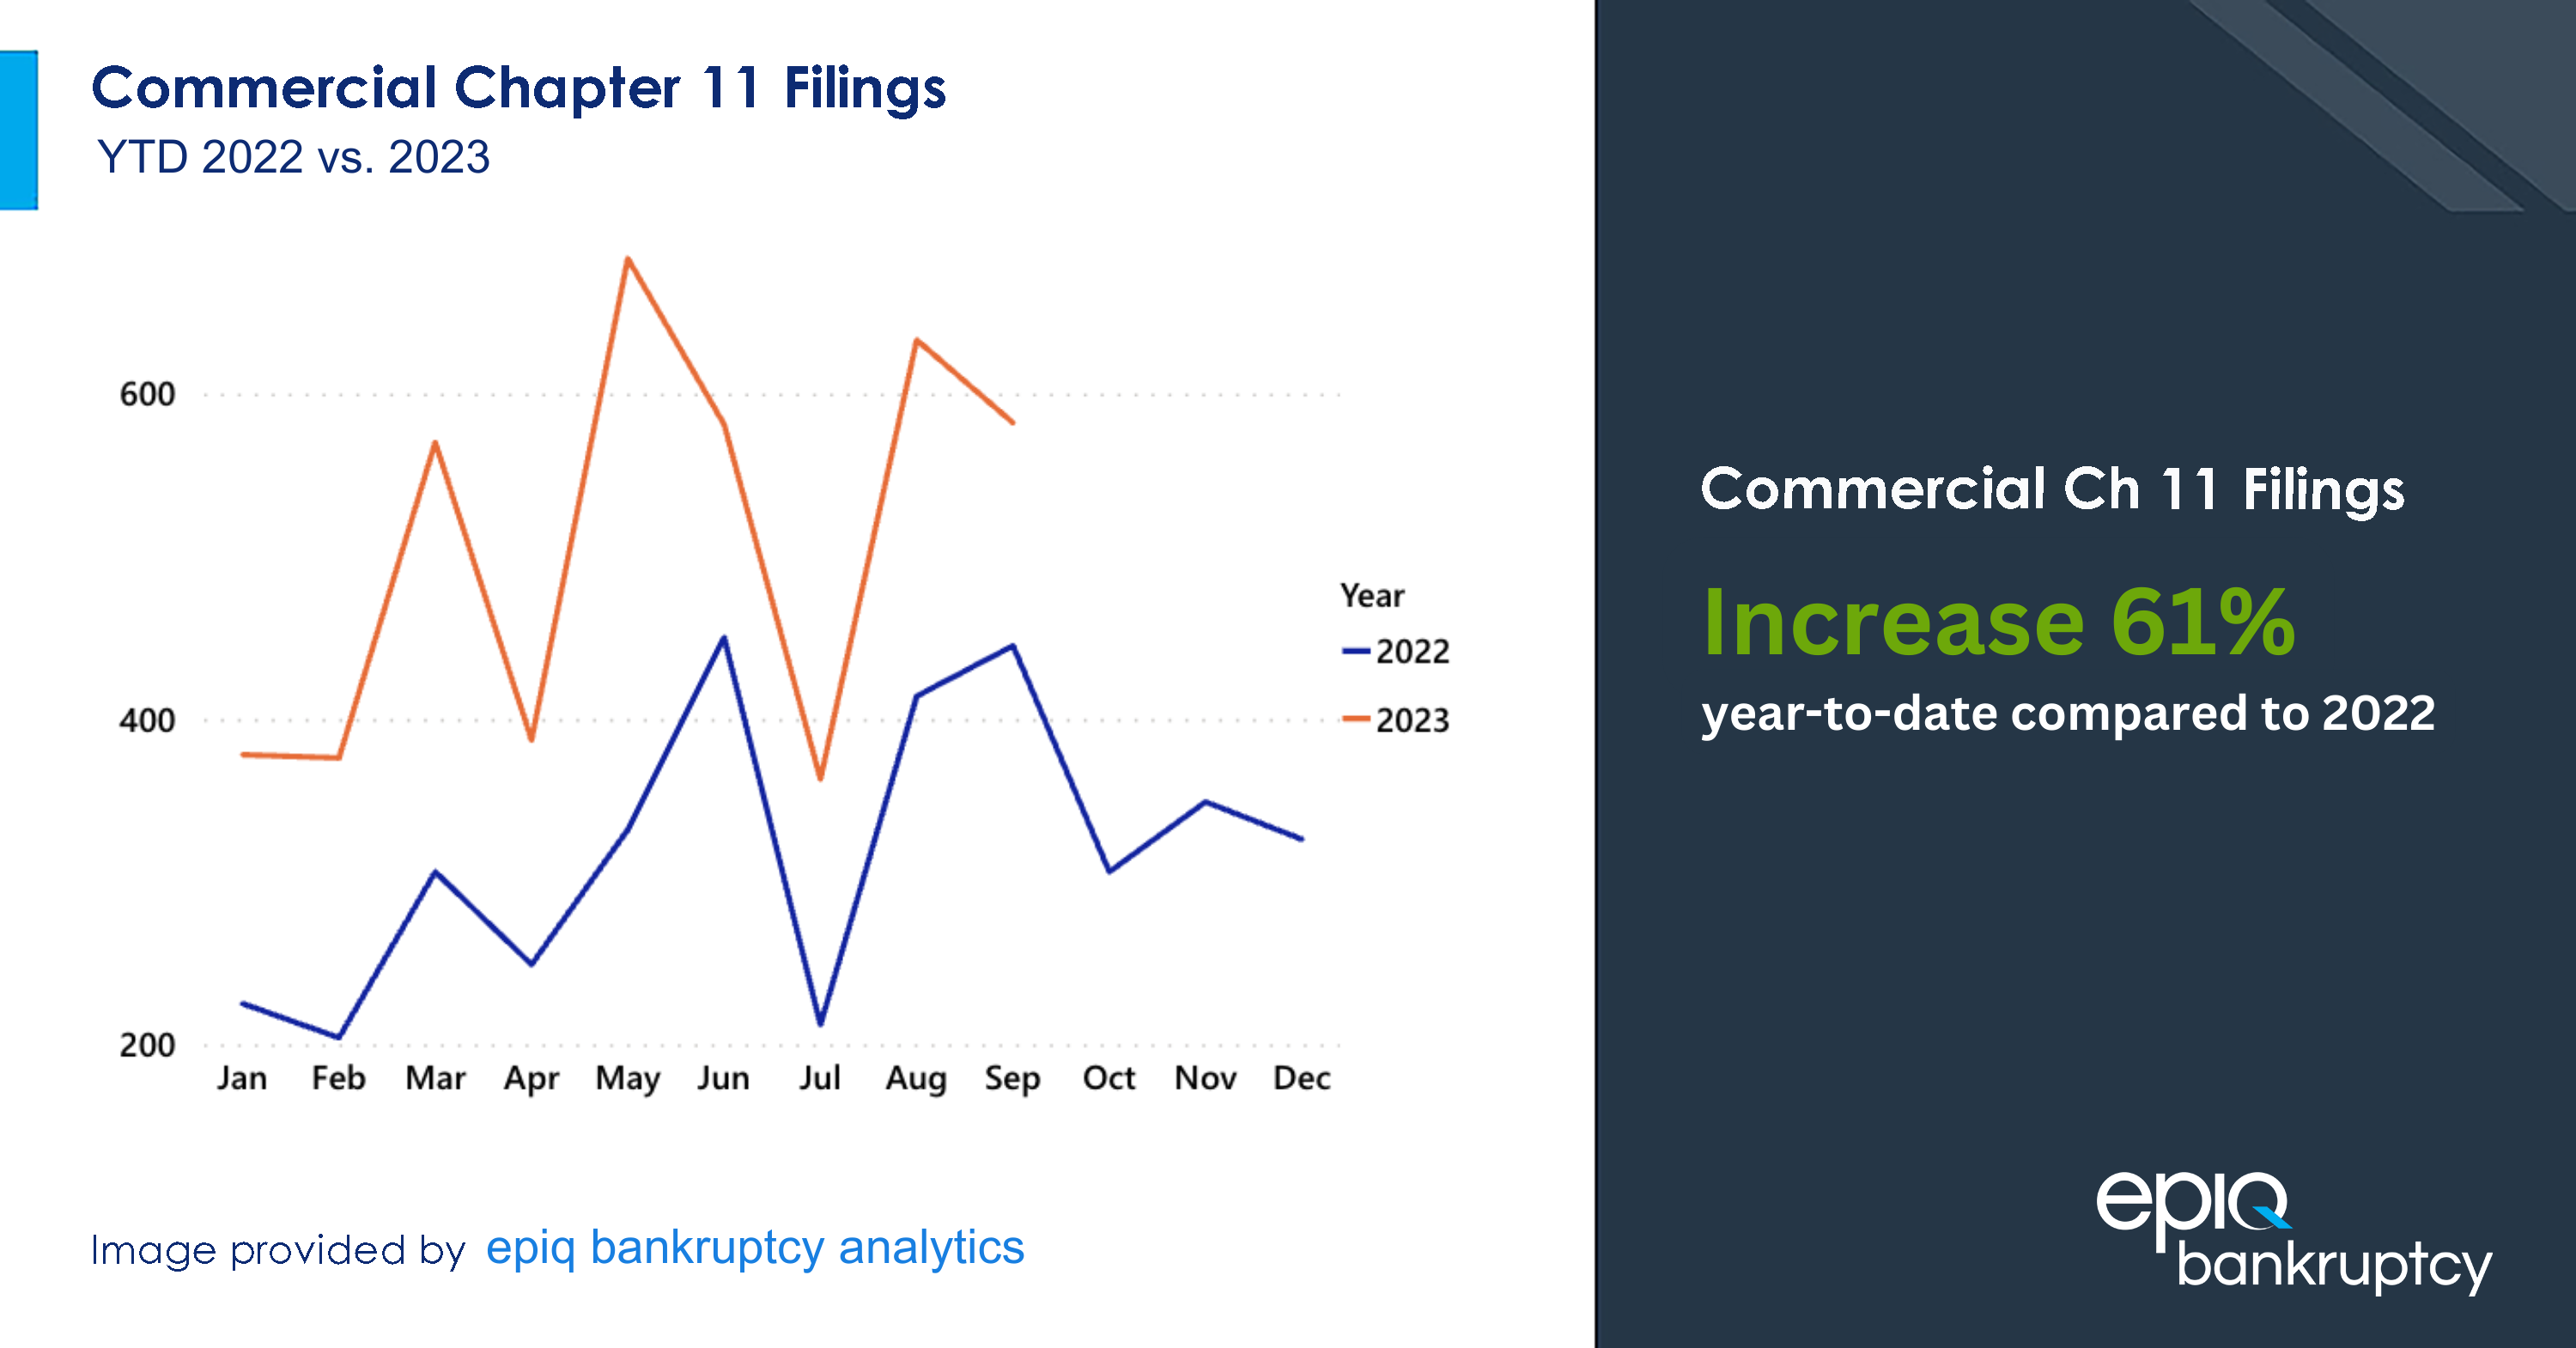 Year-to-Date Commercial Chapter 11 Filings Increased 61 Percent Compared To Same Period Last Year